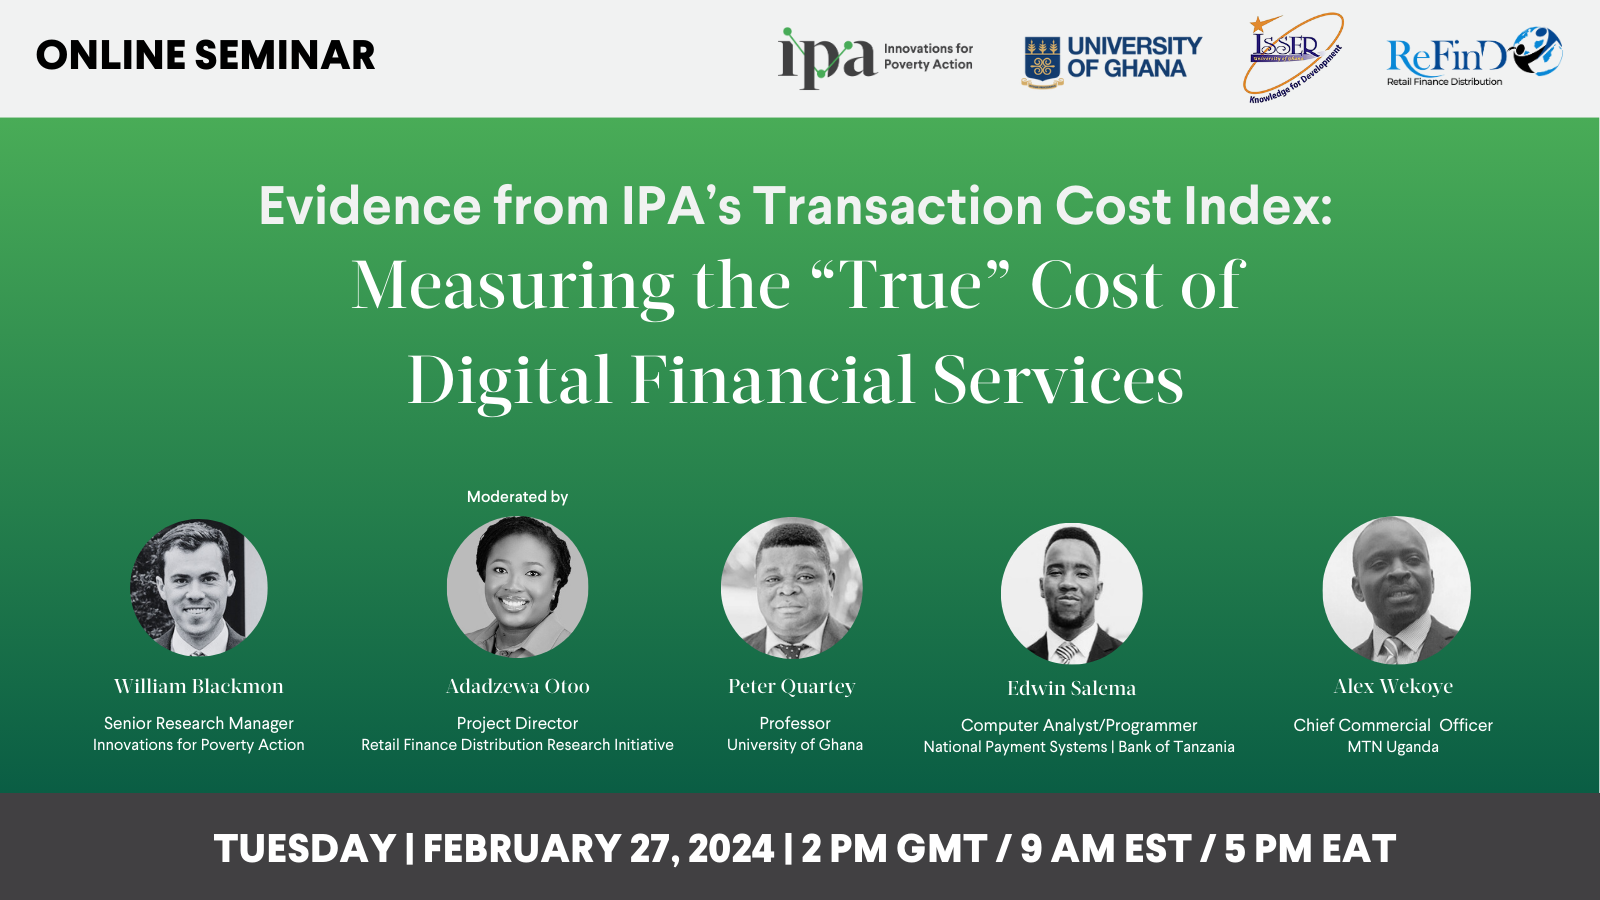 Evidence from IPA’s Transaction Cost Index: Measuring the “True” Cost of Digital Financial Services  